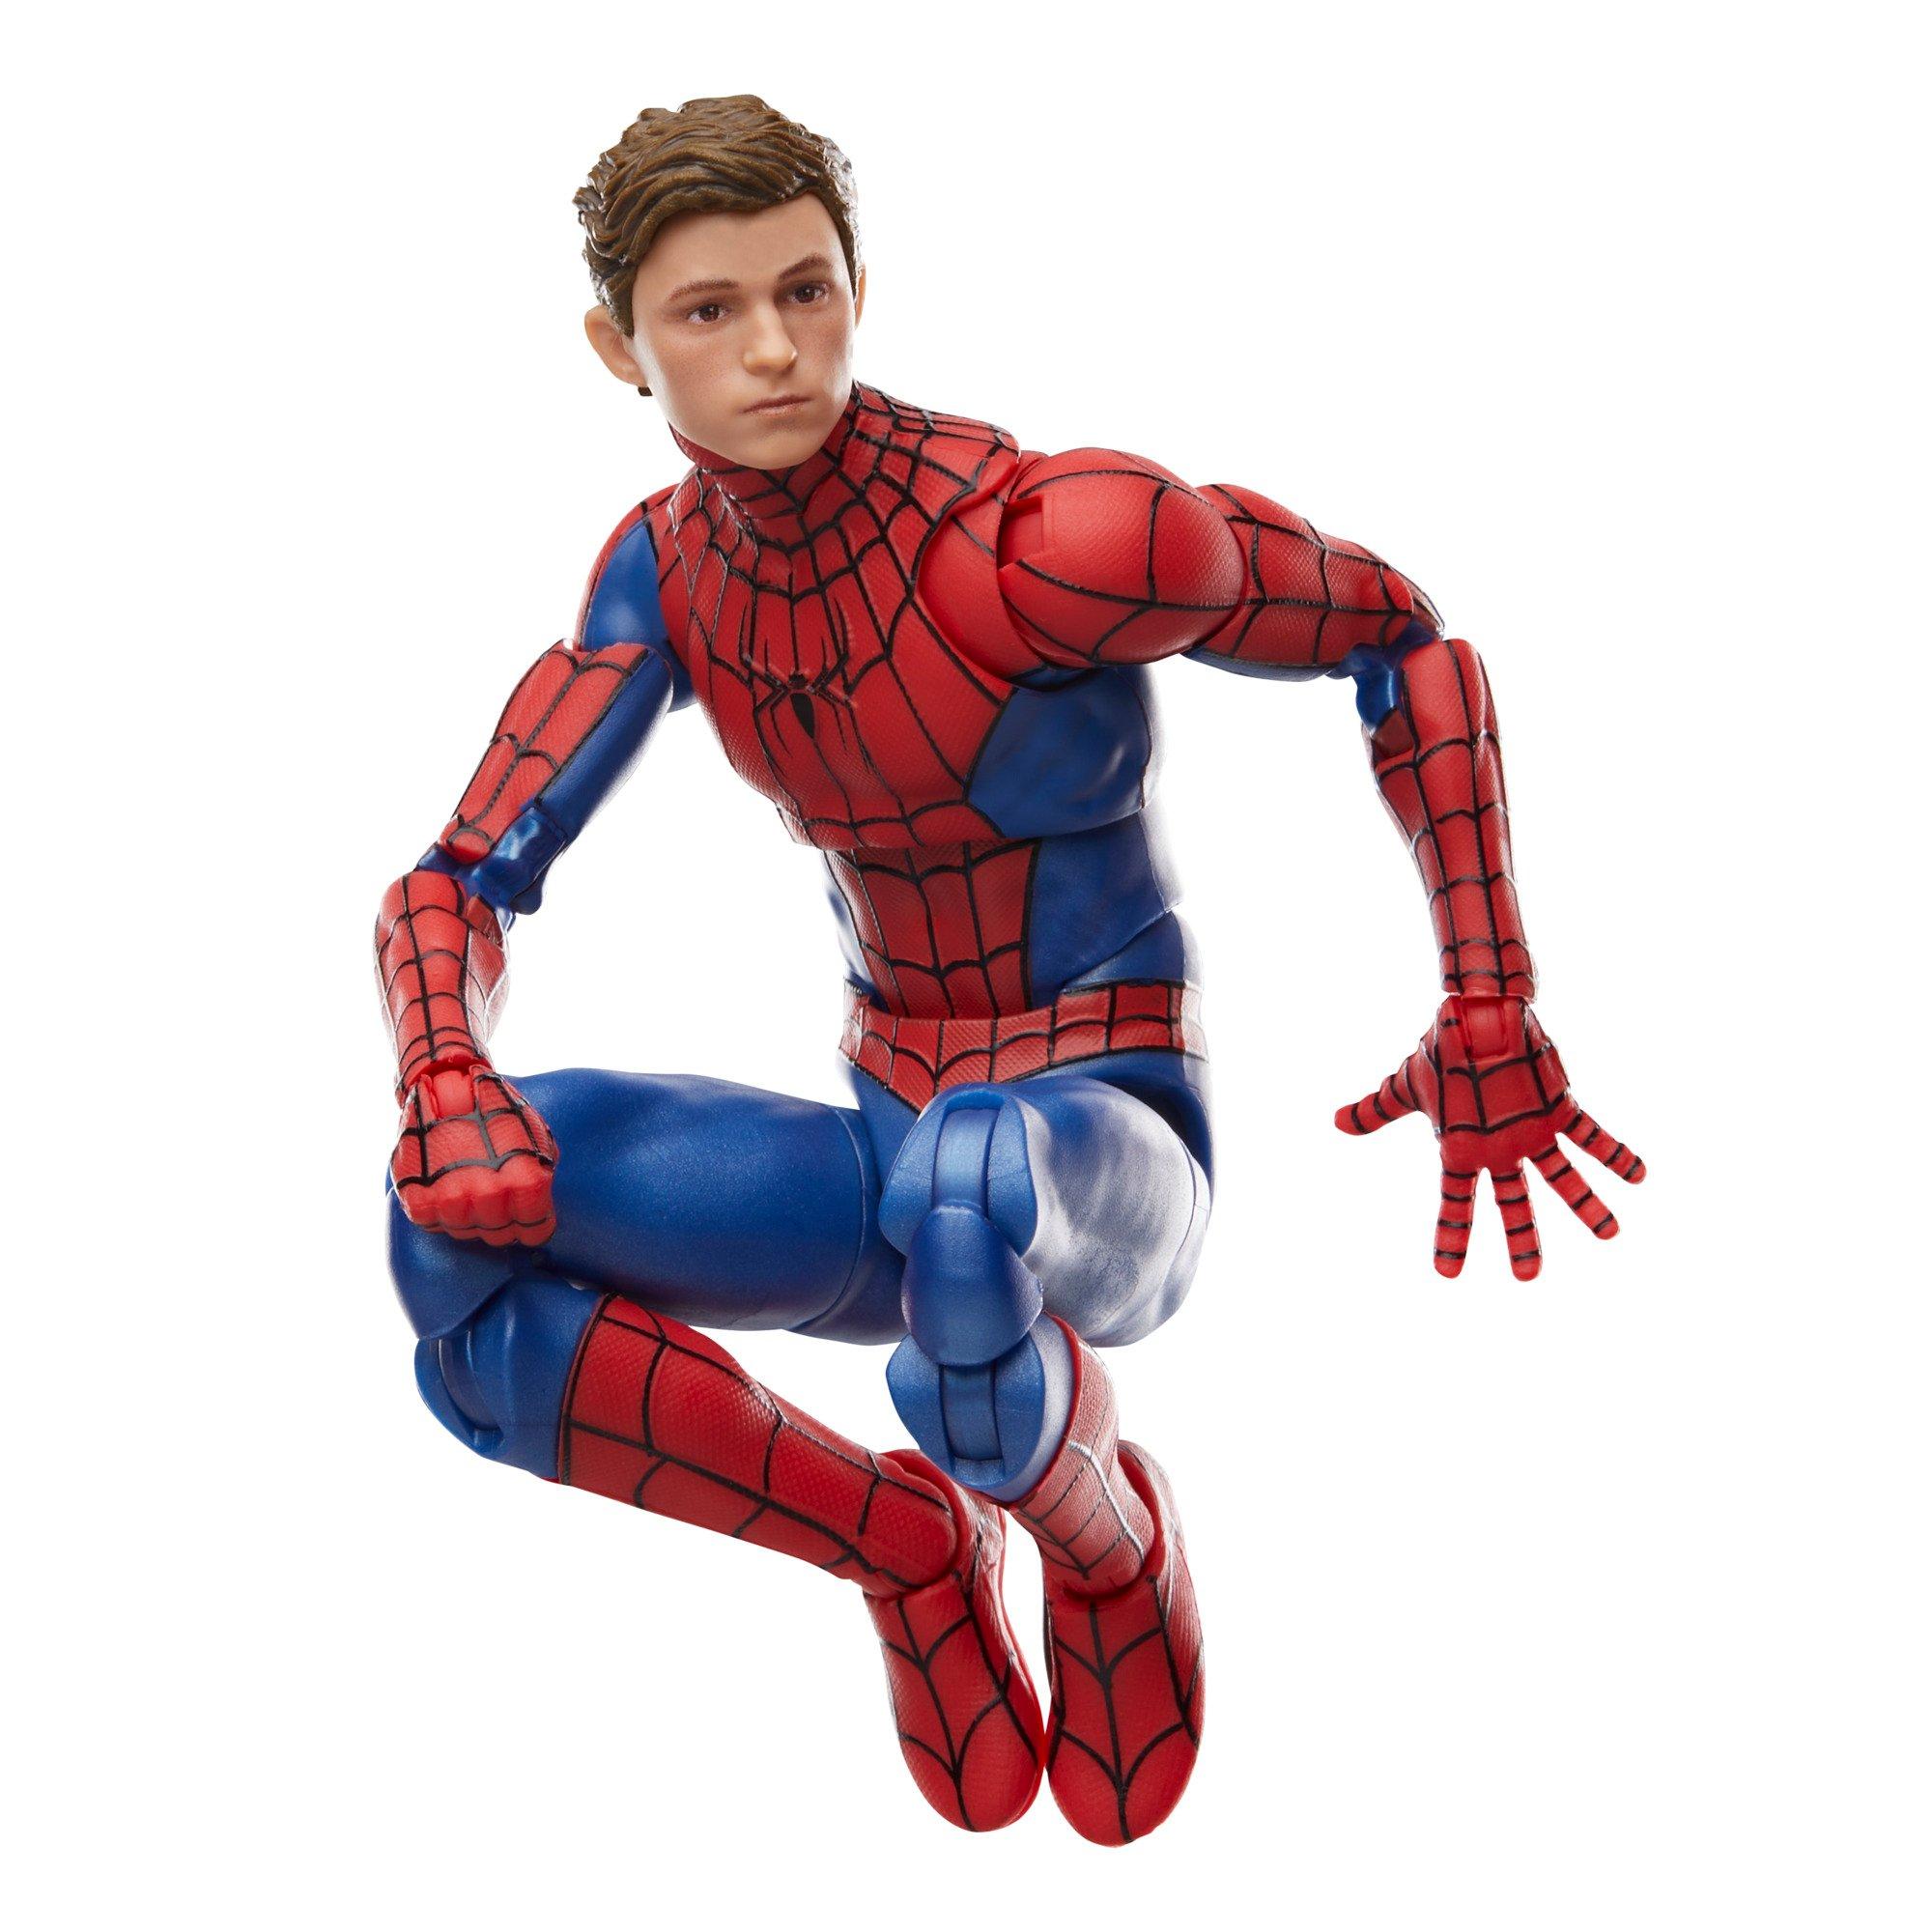  Marvel Legends Series -. The Amazing Spider-Man 2 Collectible 6  Inch Action Figures, Ages 4 and Up : Toys & Games